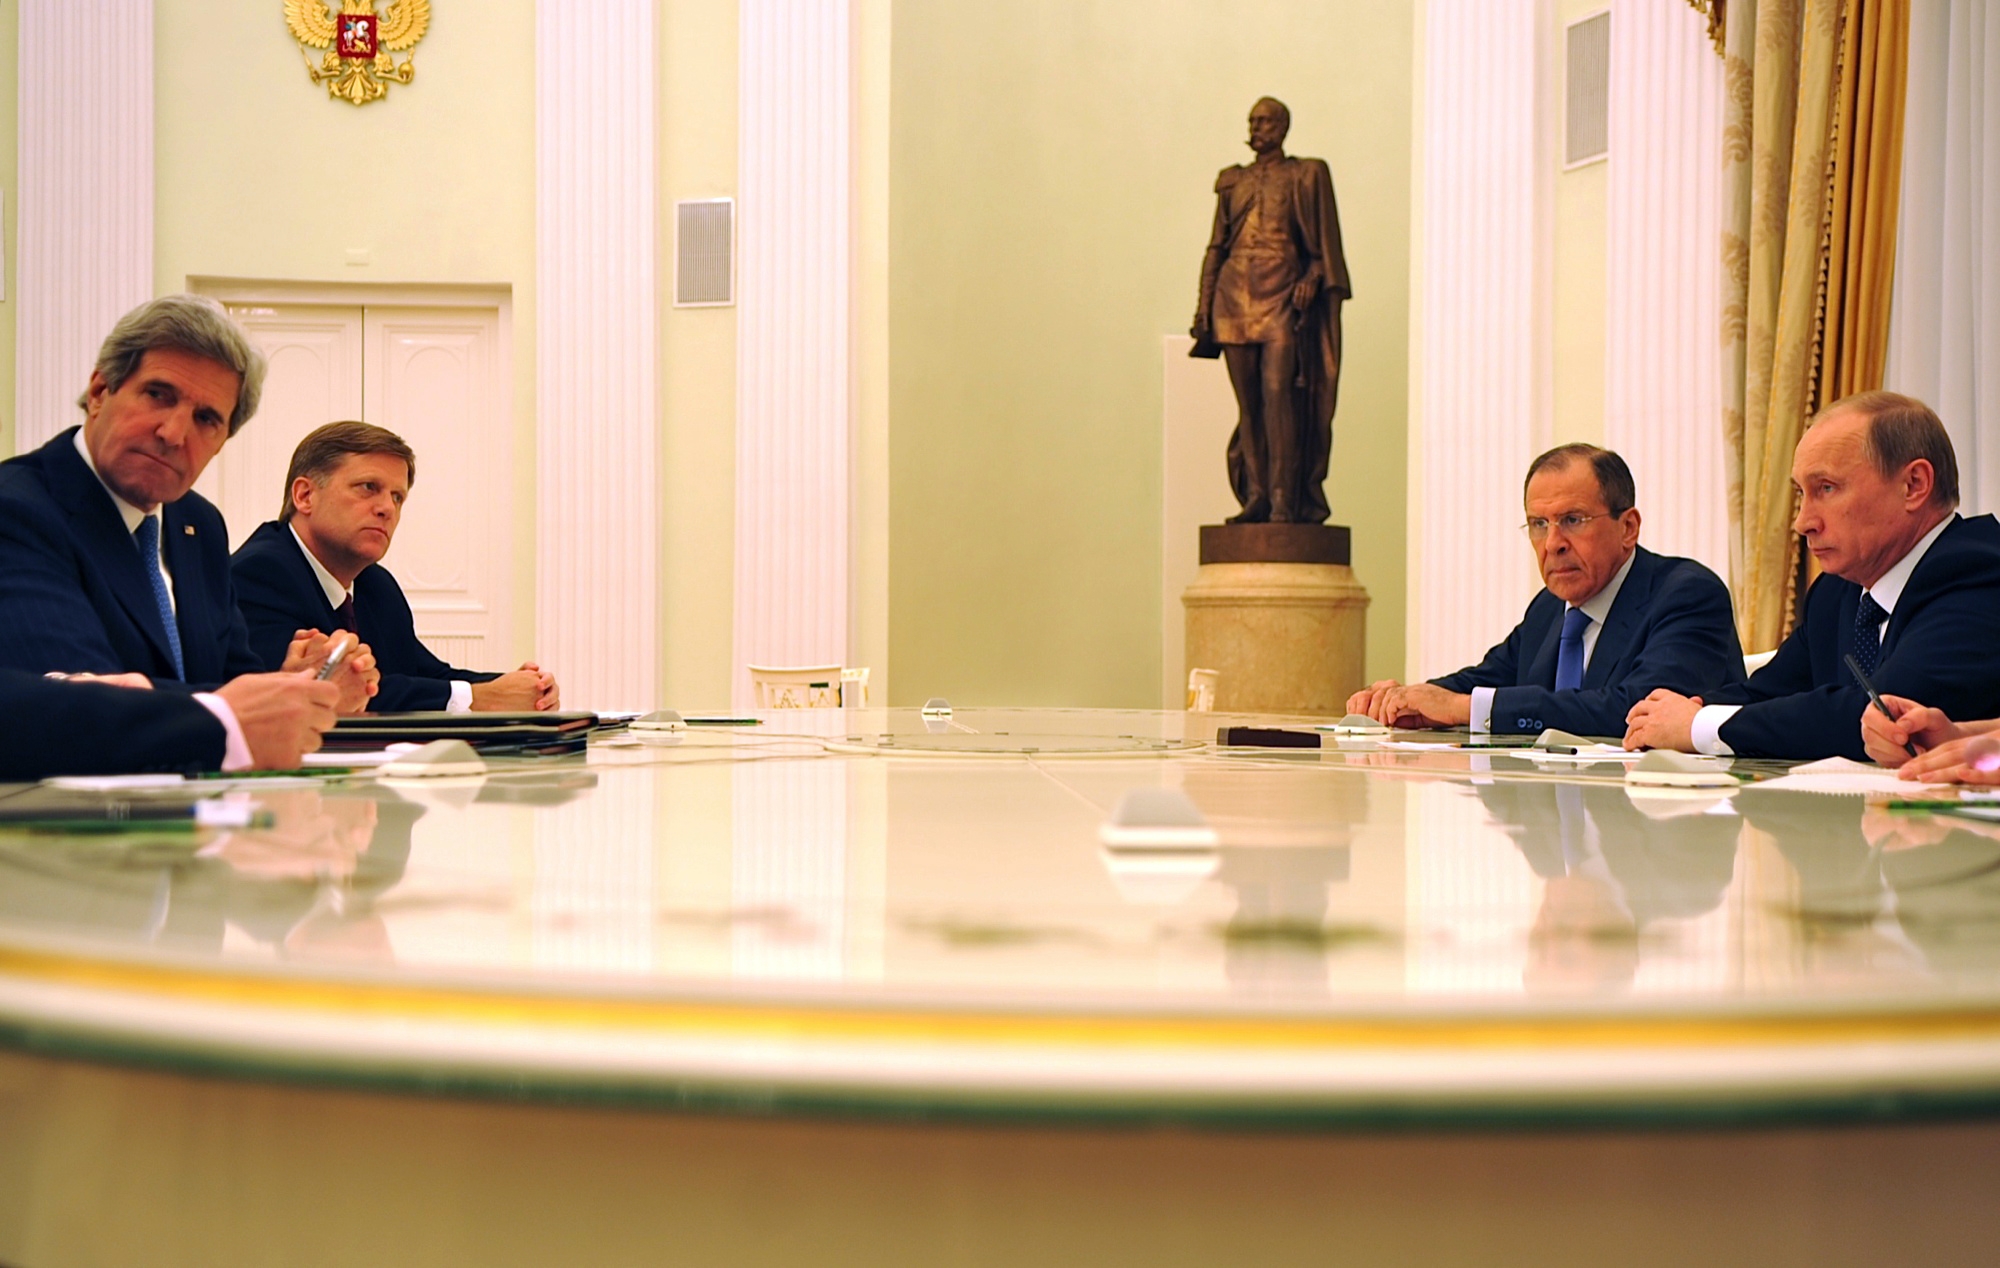 U.S. Secretary of State John Kerry, accompanied by U.S. Ambassador to Russia Michael McFaul meets with Russian President Vladimir Putin and Russian Foreign Minister Sergey Lavrov in Moscow, Russia, on May 7, 2013. [State Department photo/ Public Domain]